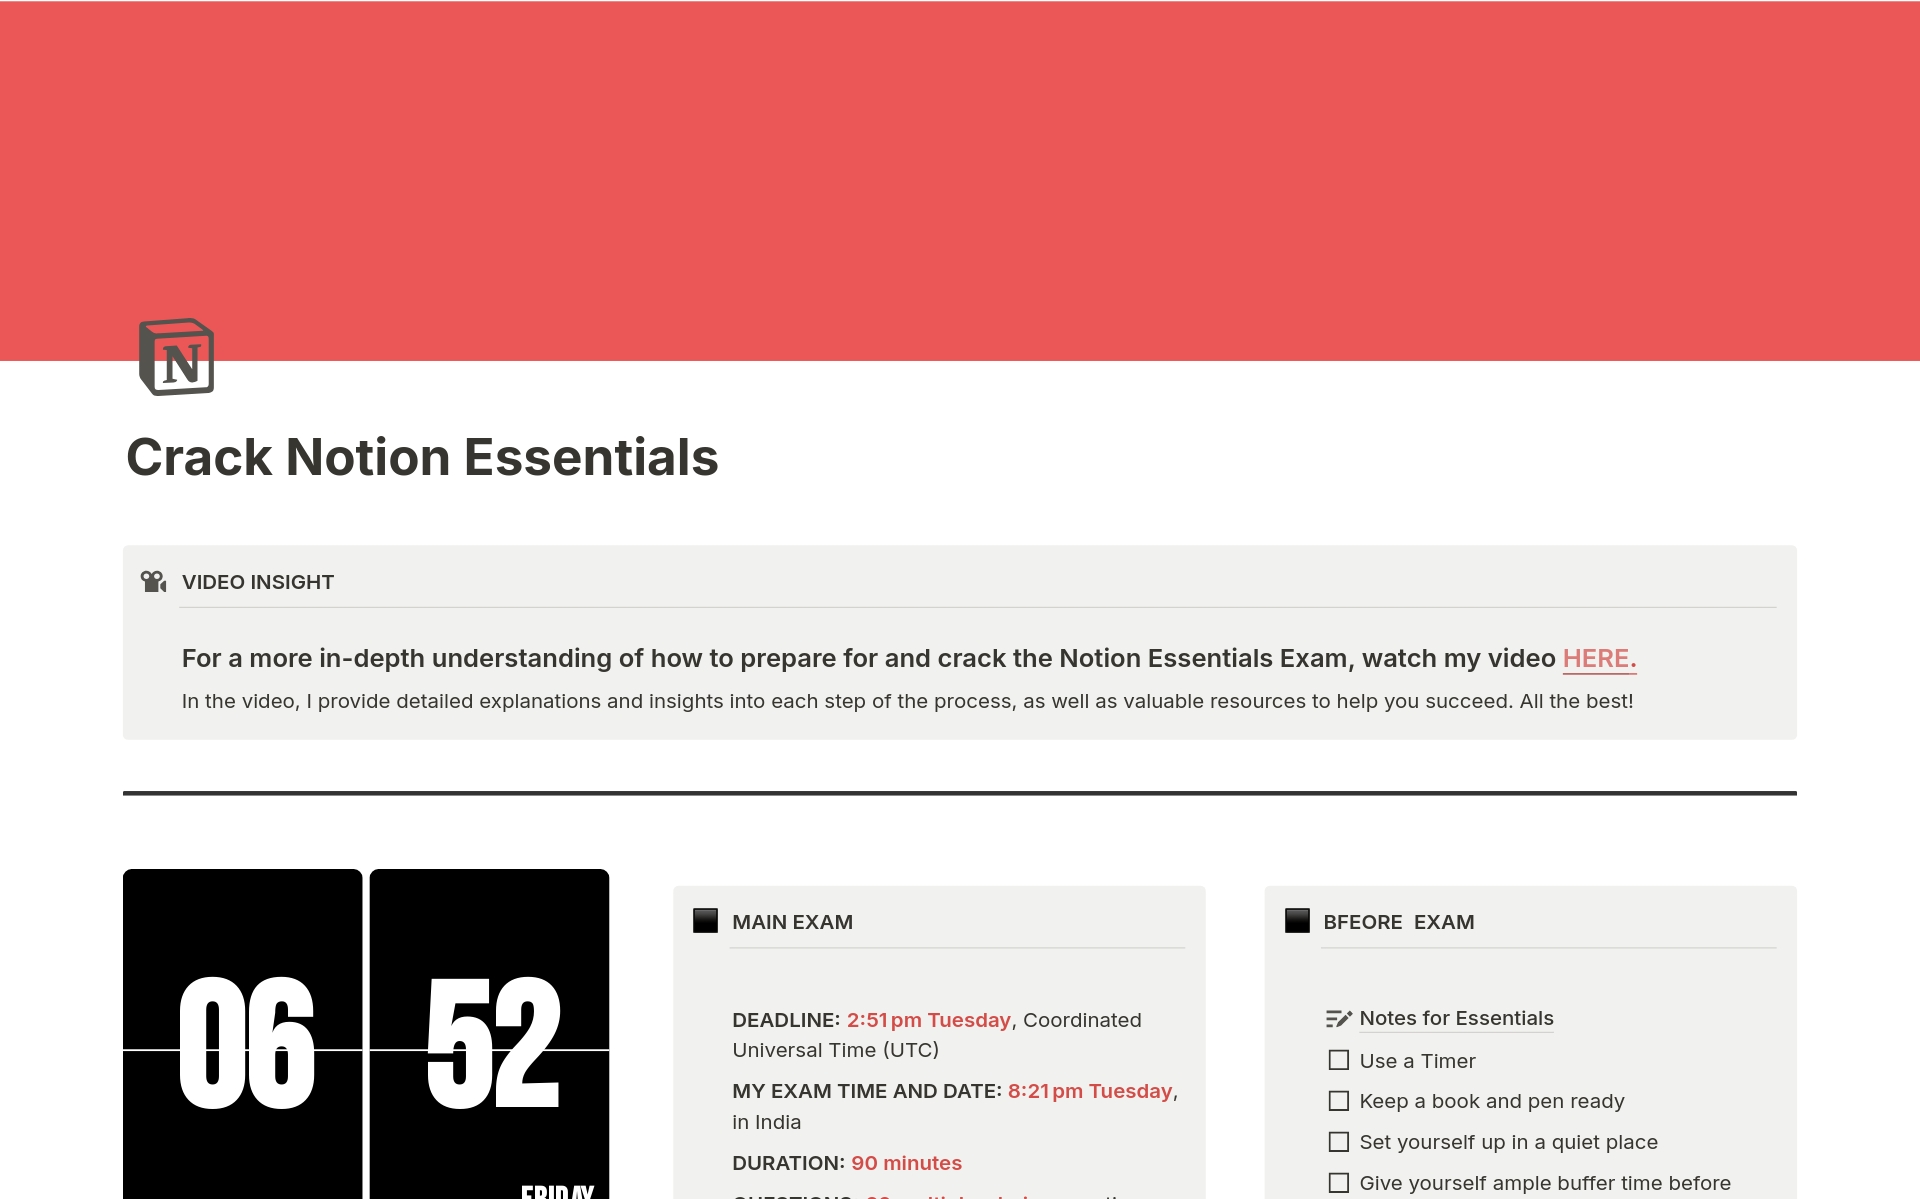 This meticulously crafted template is your ultimate study companion. Whether you're new to Notion or a seasoned user, this template will help you master the fundamentals and earn your certification.